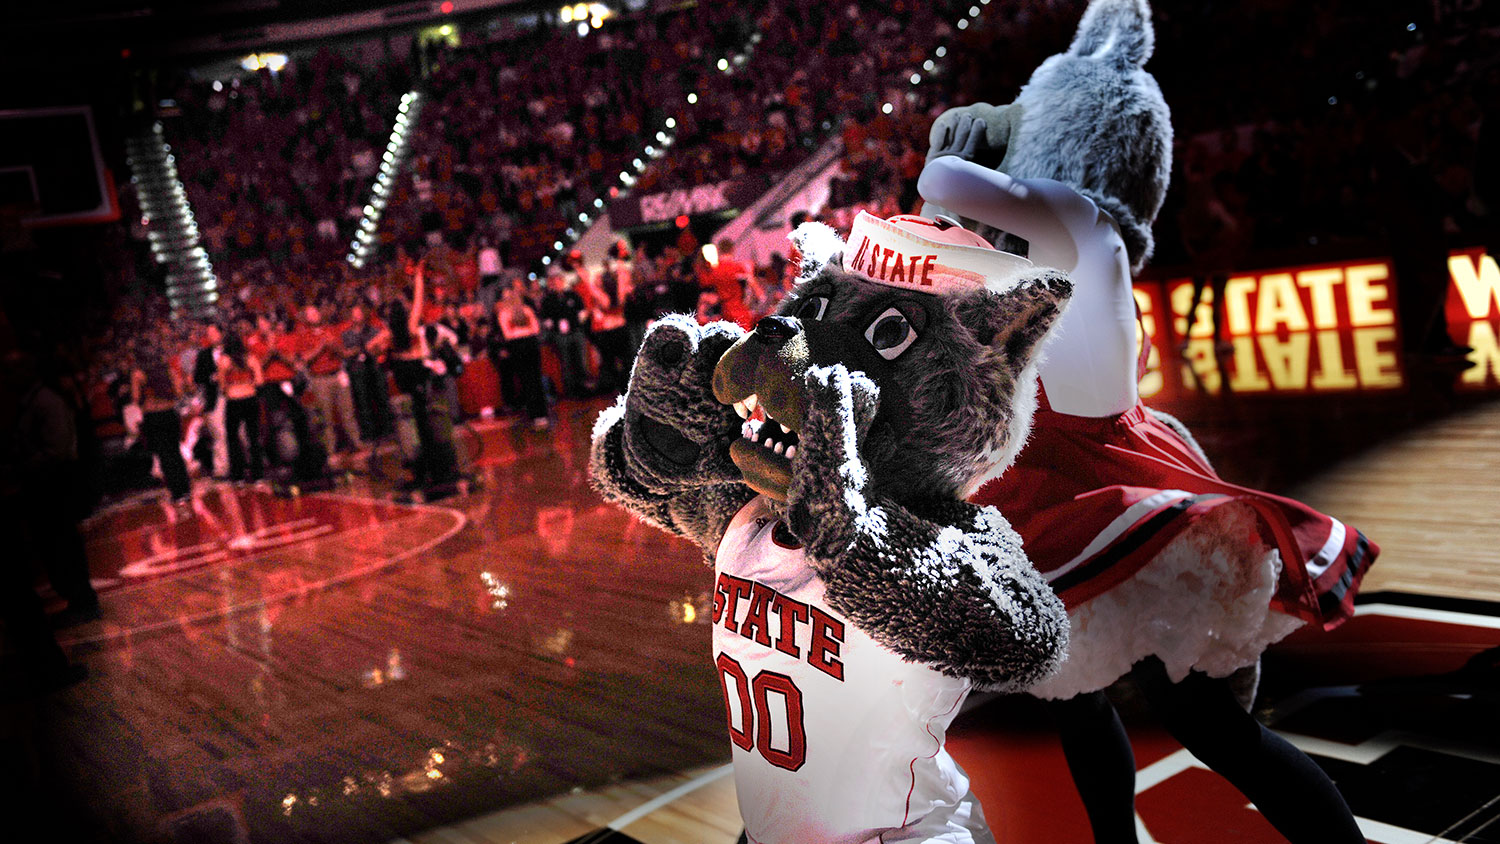 Mr. and Ms. Wuf howling at an NC State men's basketball game